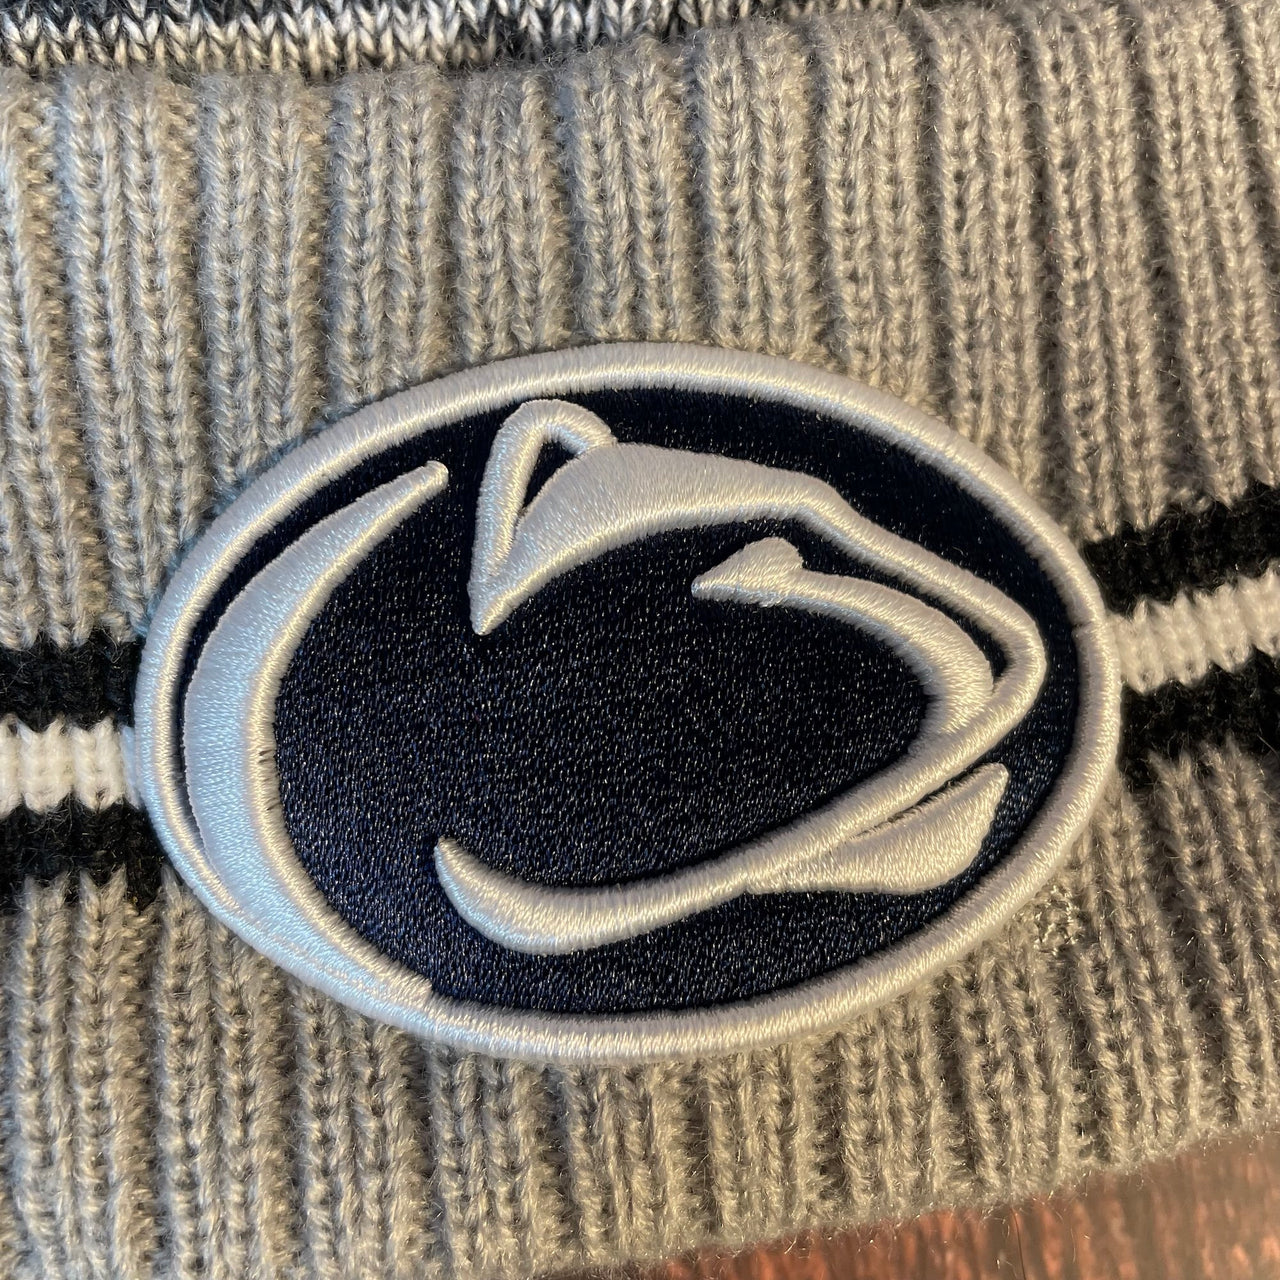 Close up of Penn State Nittany Lions logo at the front raised cuff